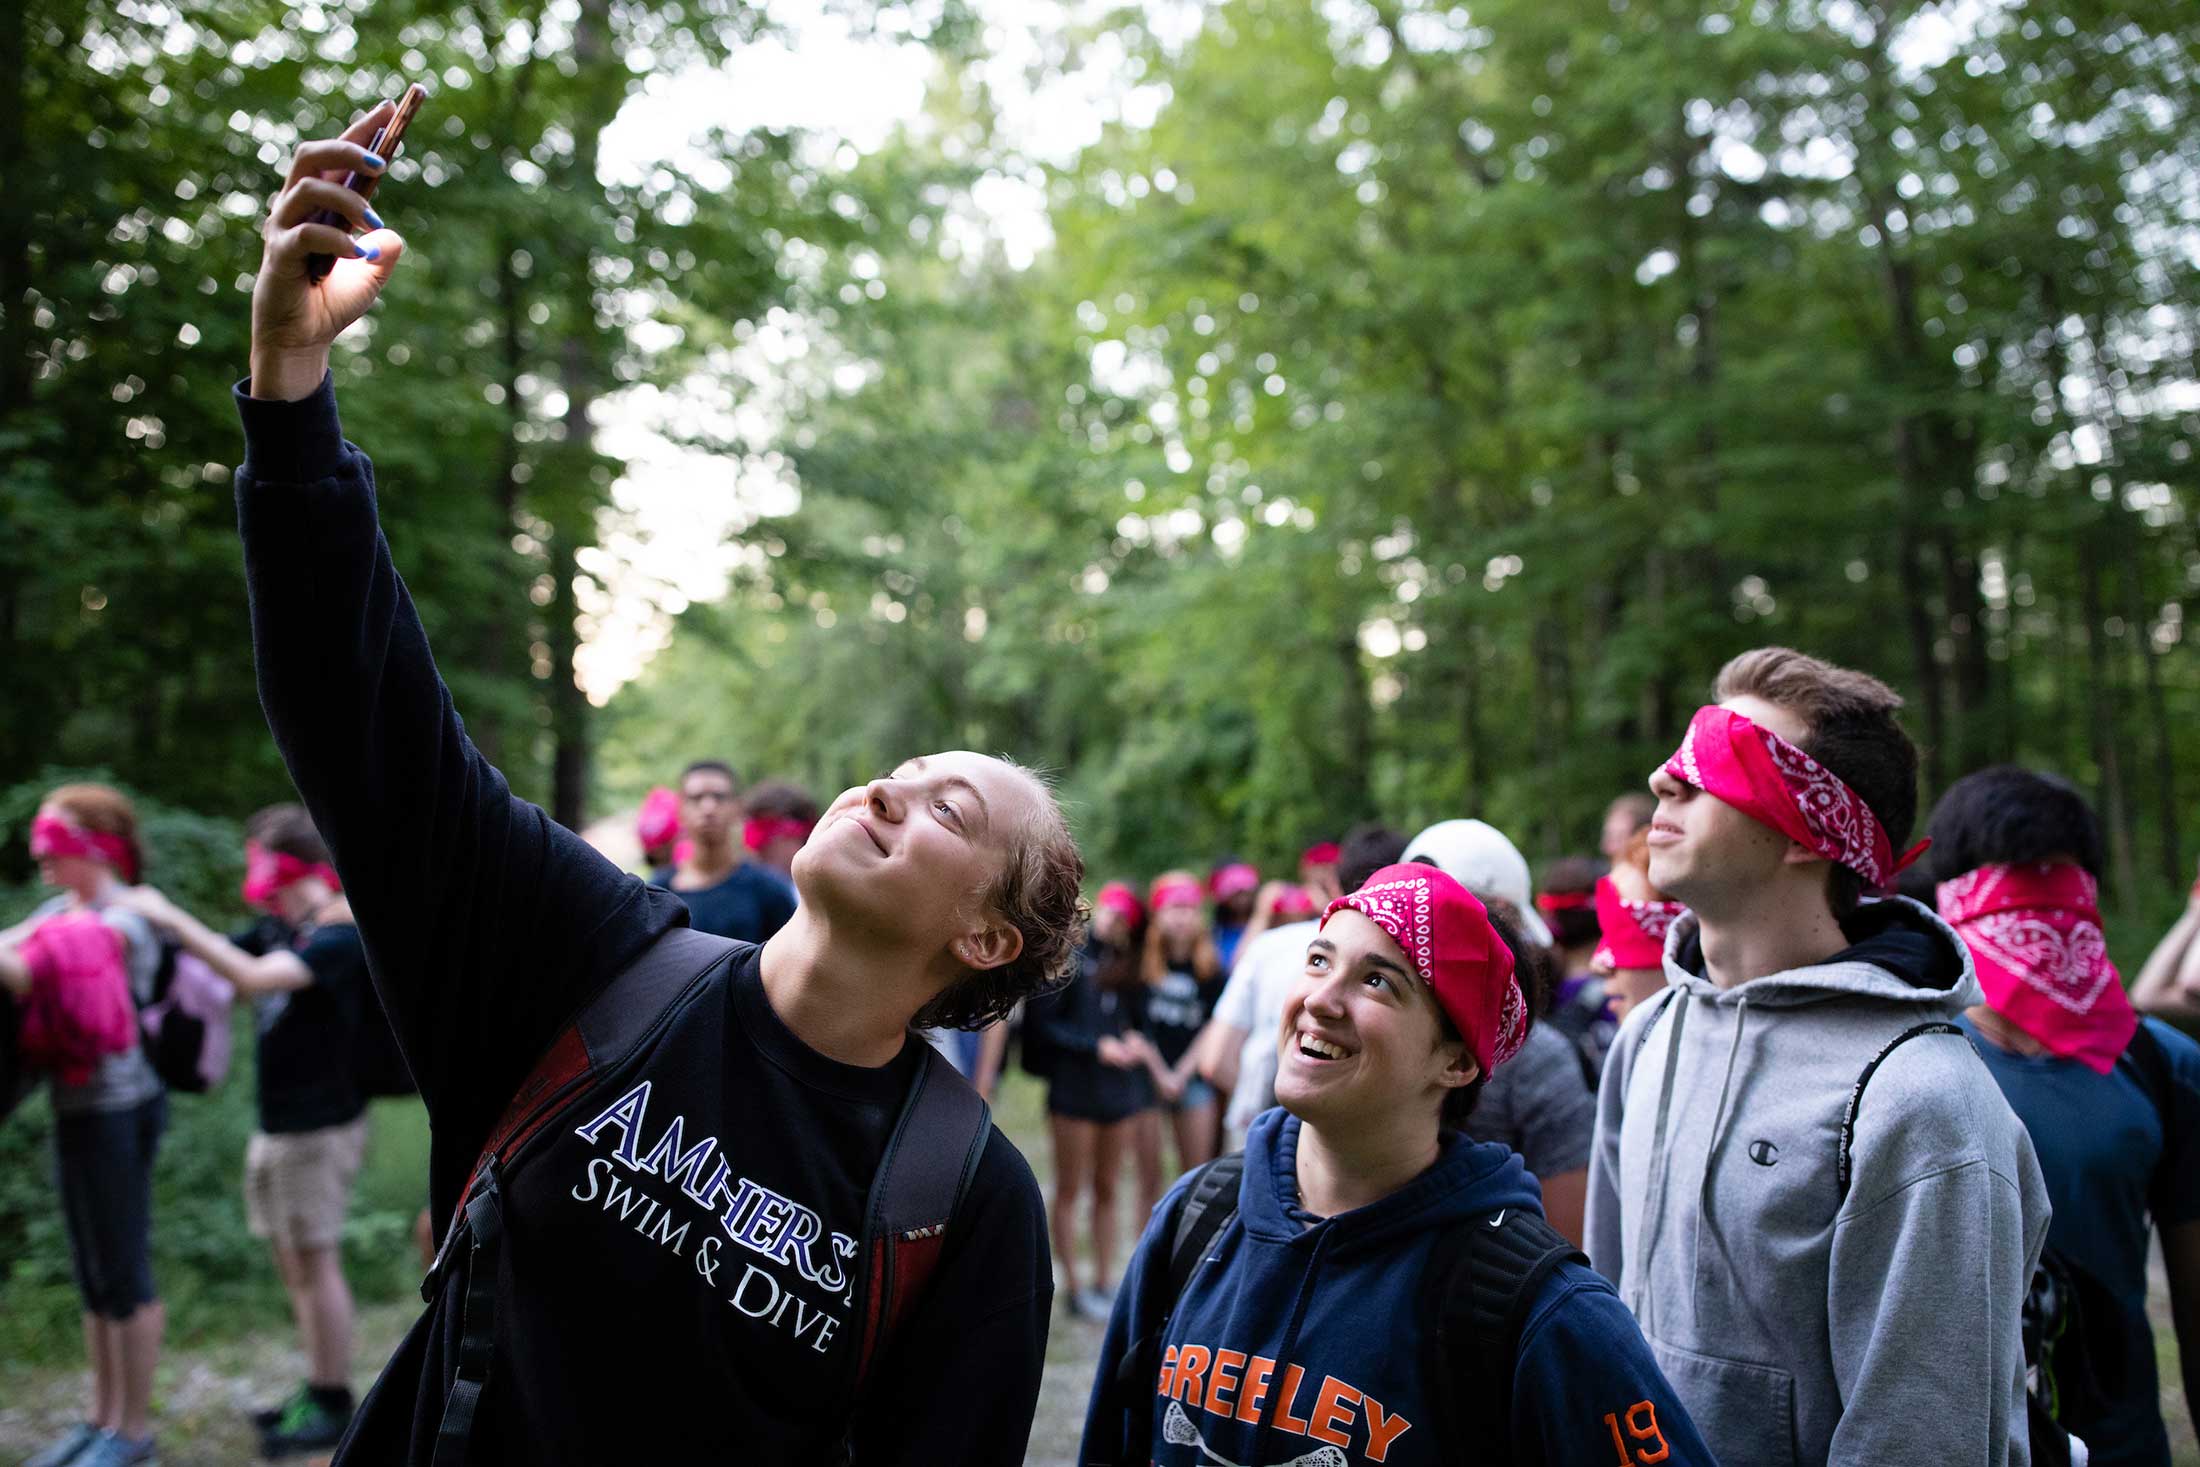 Students, all wearing red bandanas on their heads, pose for a selfie during an orientation activity.